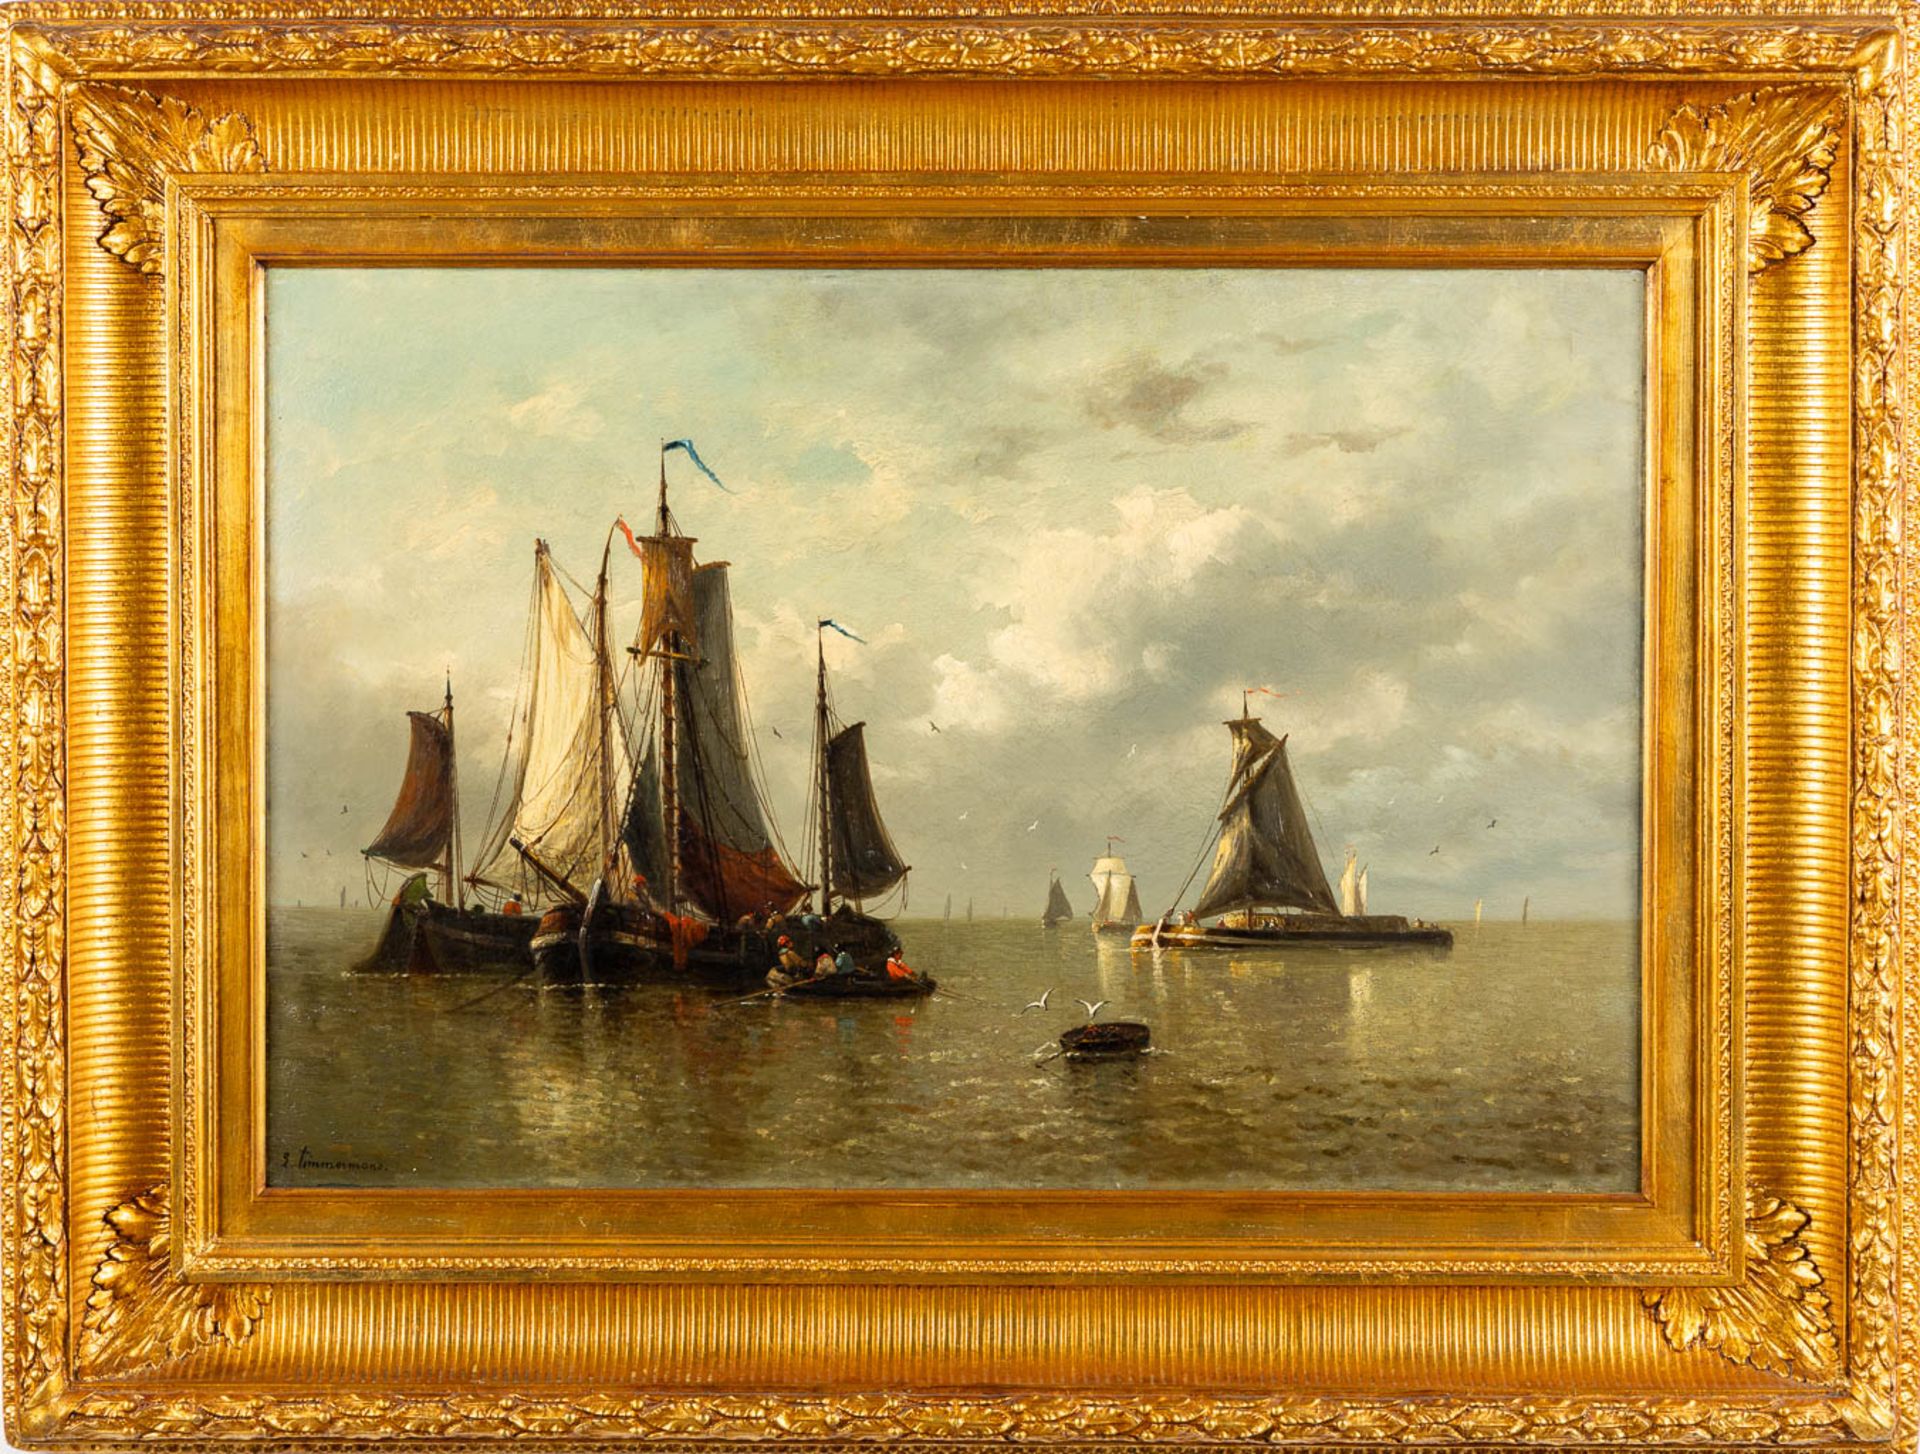 Louis TIMMERMANS (1846-1910) 'Marine' oil on canvas. (W:76 x H:51 cm) - Image 3 of 9